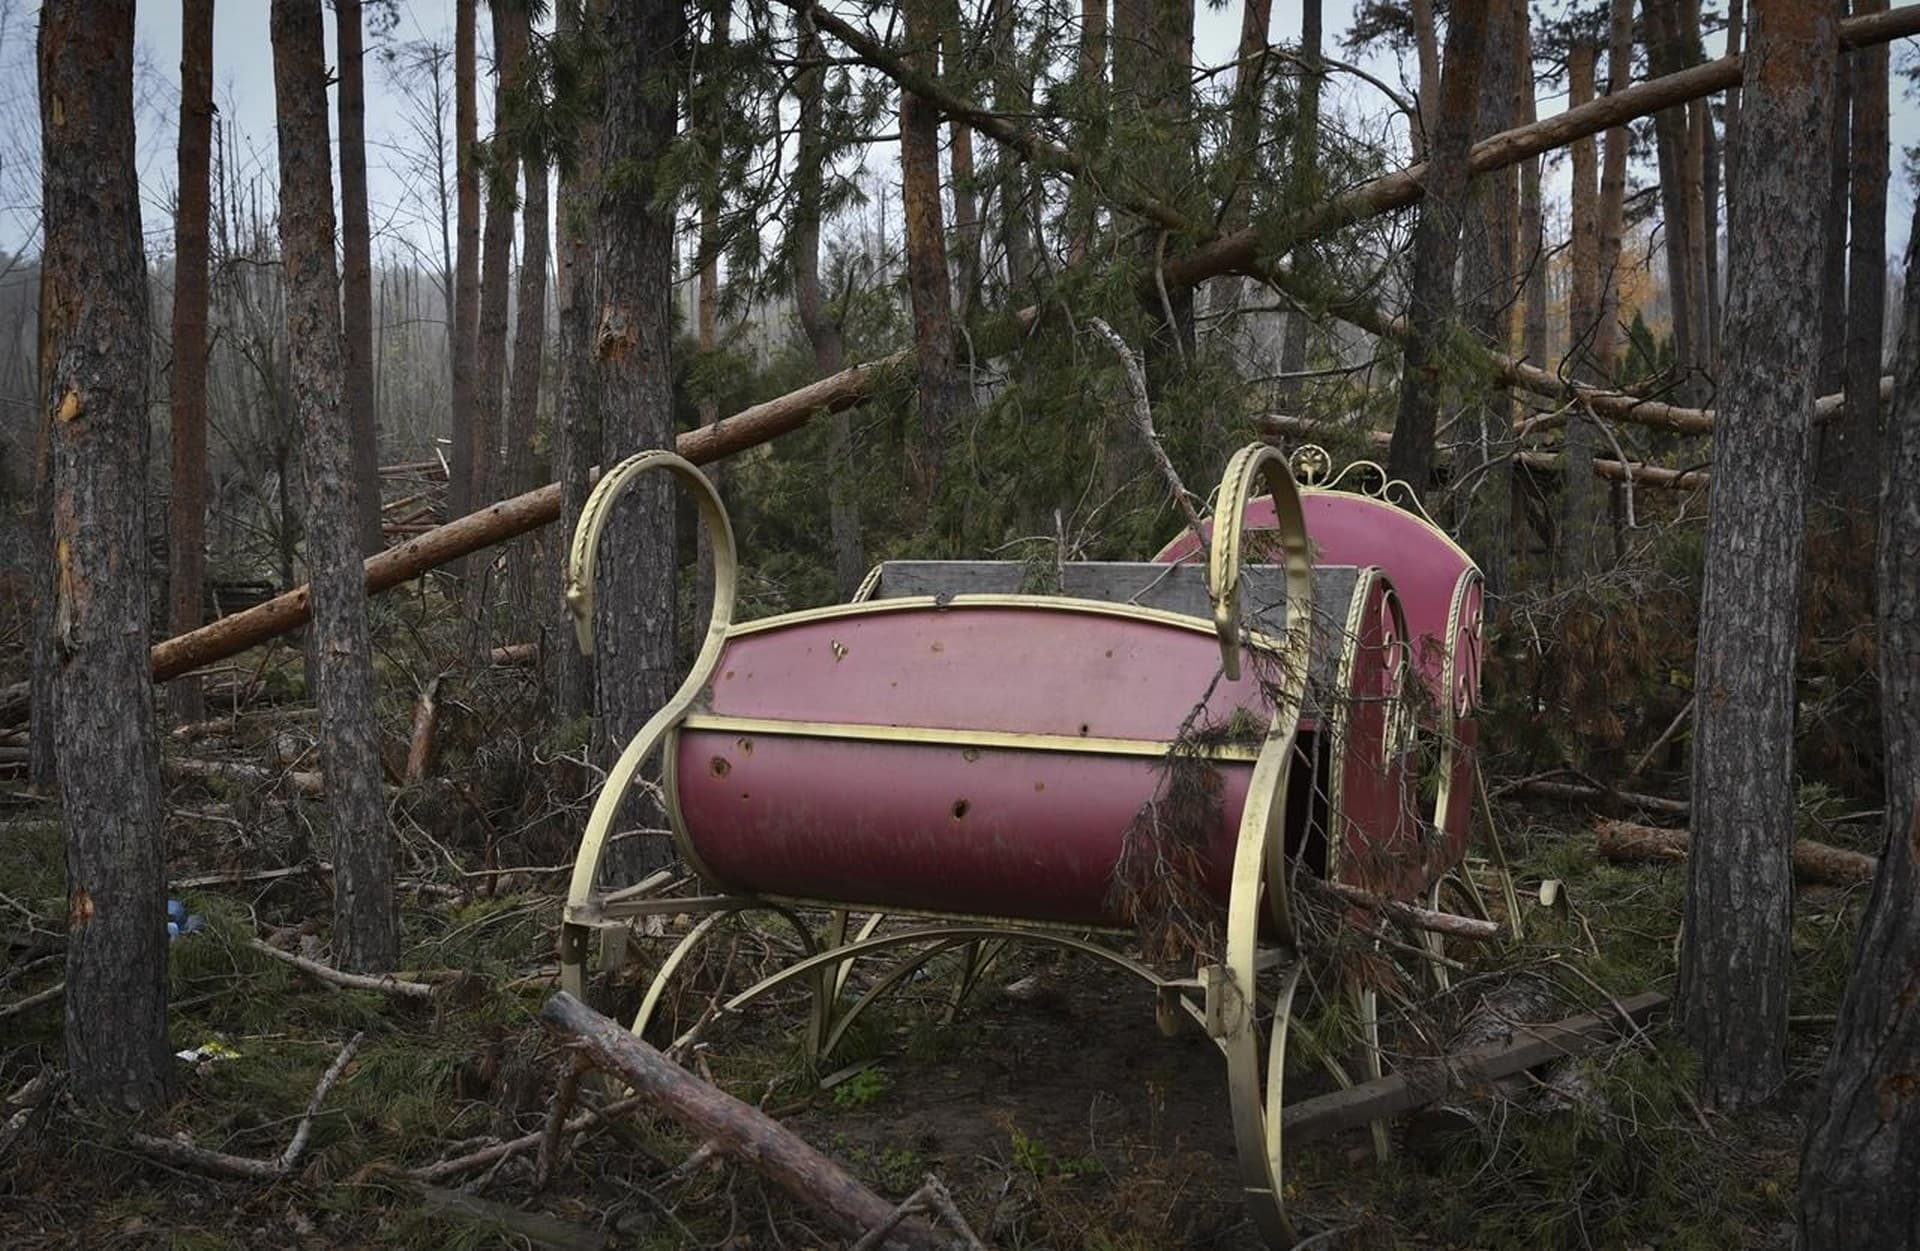 A pleasure cart is seen in the forest in the recently recaptured village of Yampil